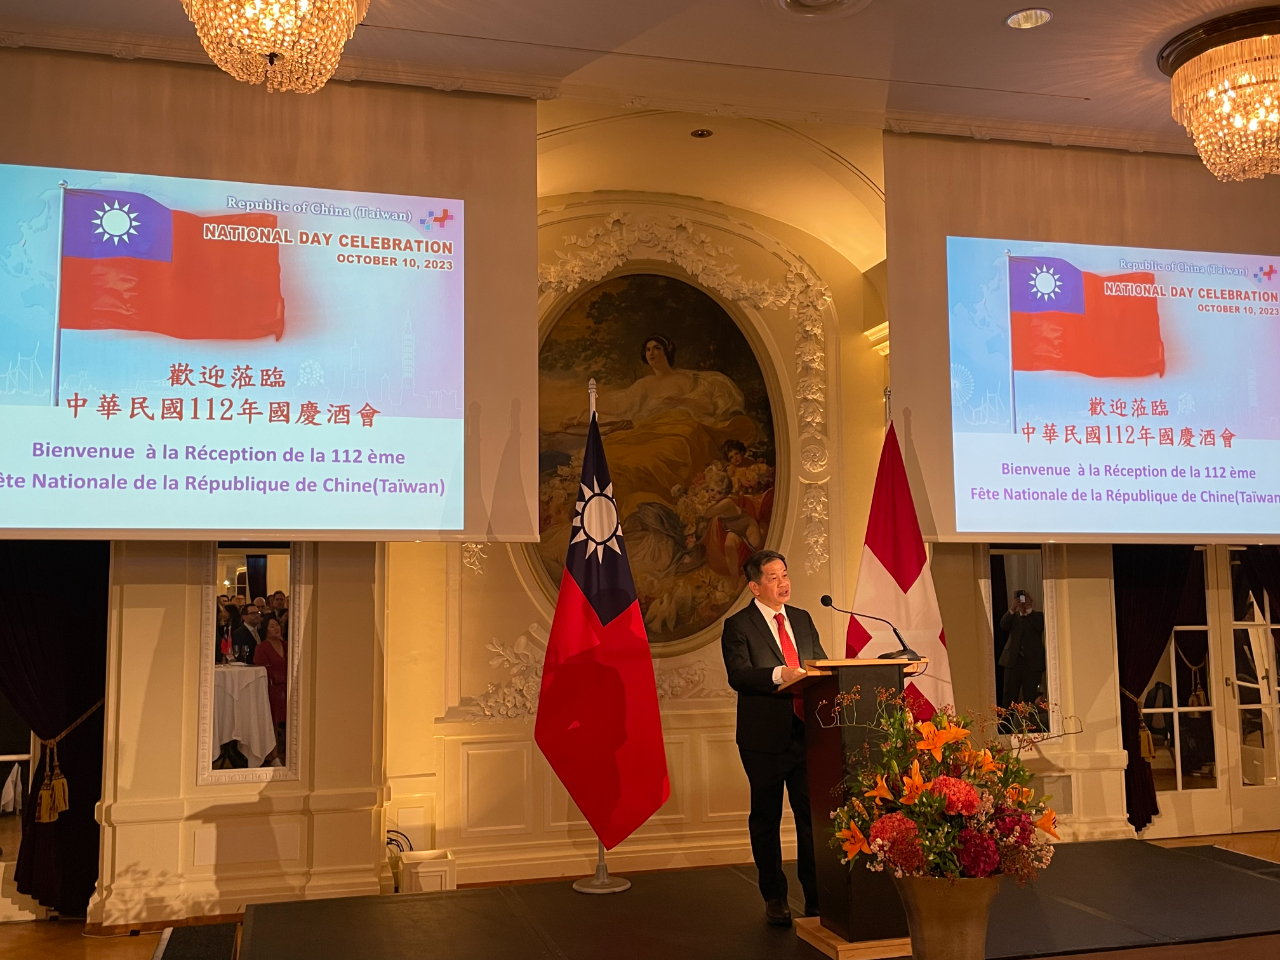 The reception for the National Day of the Republic of China (Taiwan) is held on 9th Oct. 2023 and hosted by Dr. David Wei-Feng, Huang.